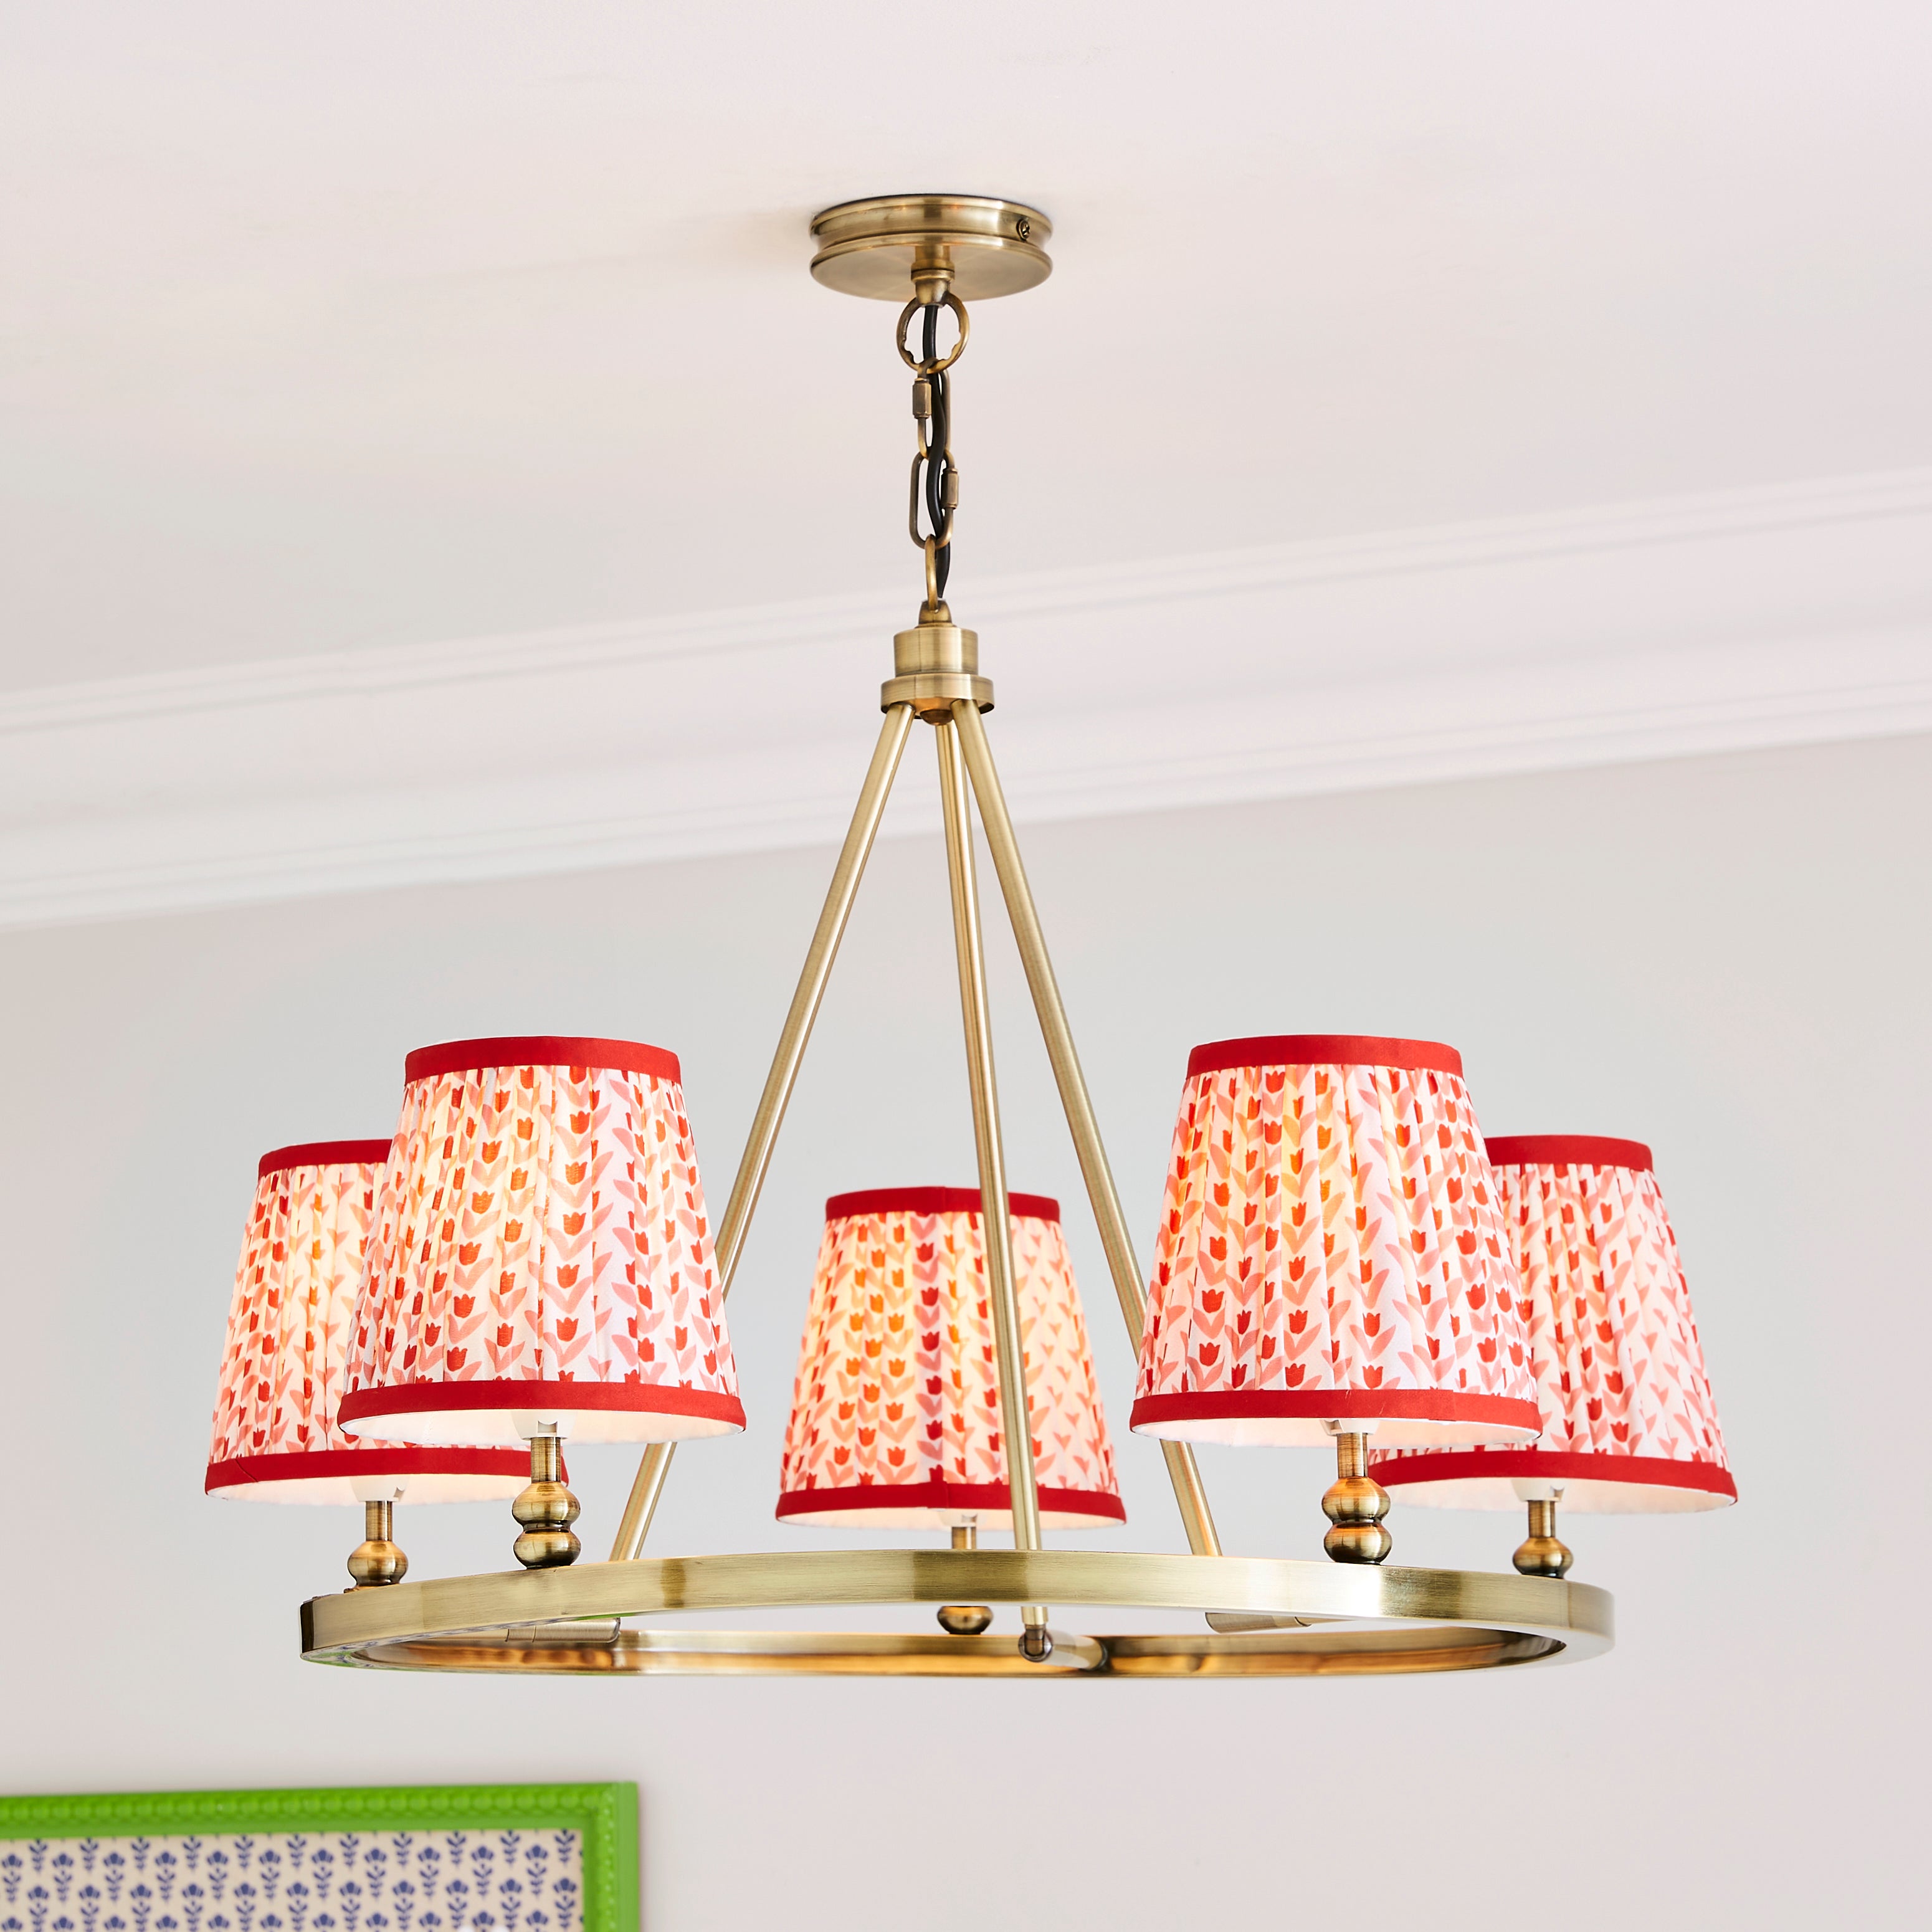 Pride Joy 5 Light Halo Ceiling Fitting Red